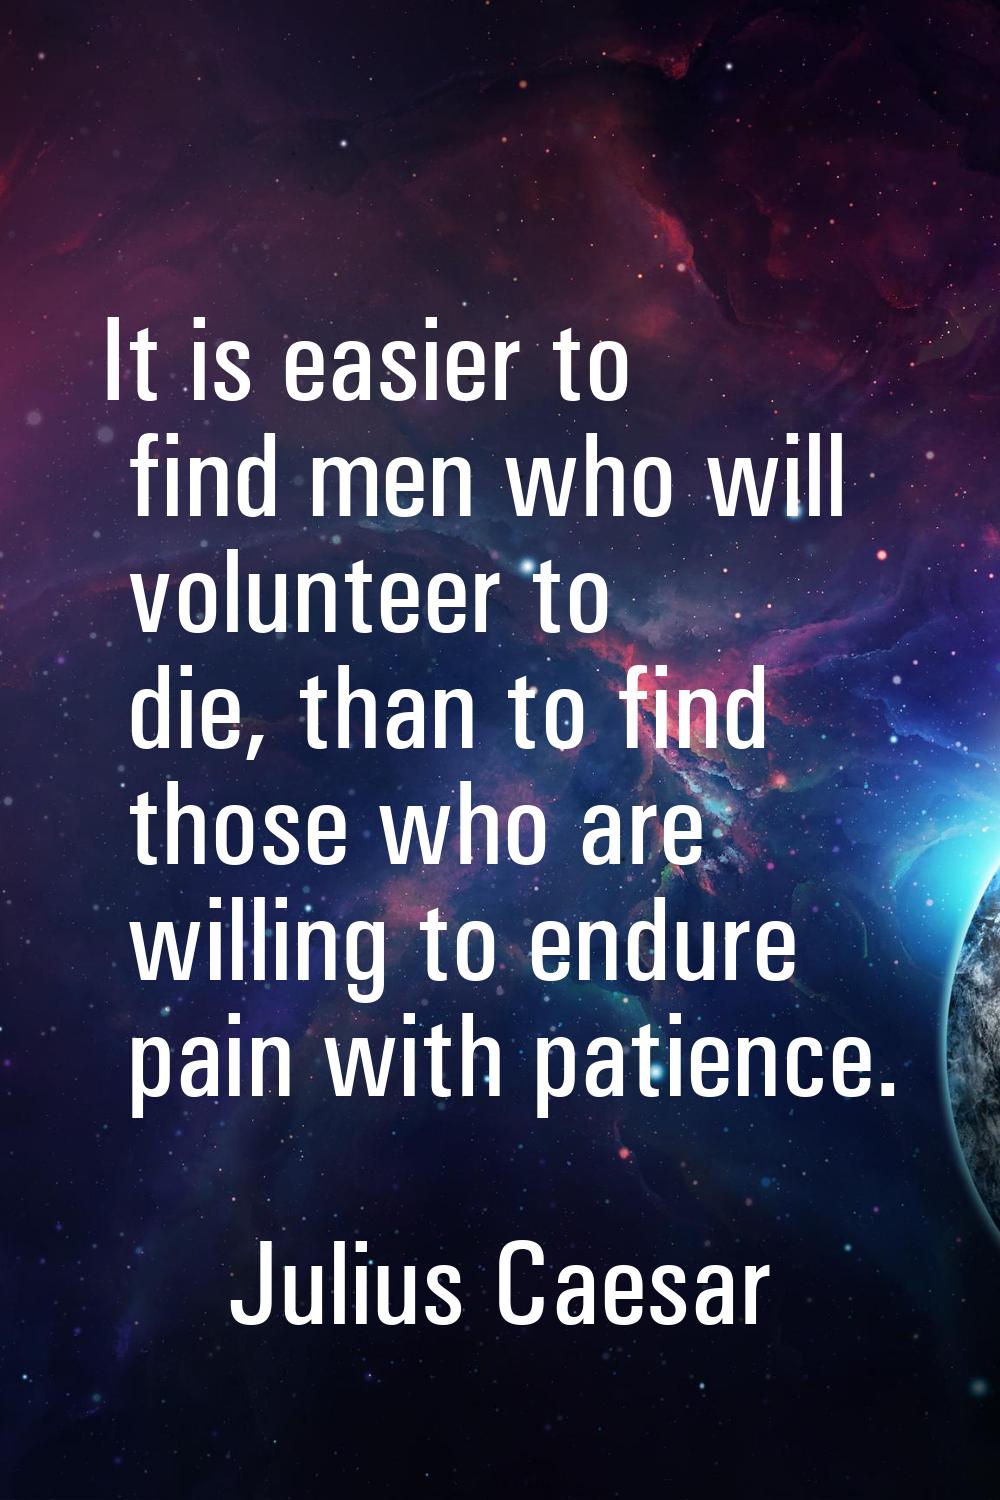 It is easier to find men who will volunteer to die, than to find those who are willing to endure pa